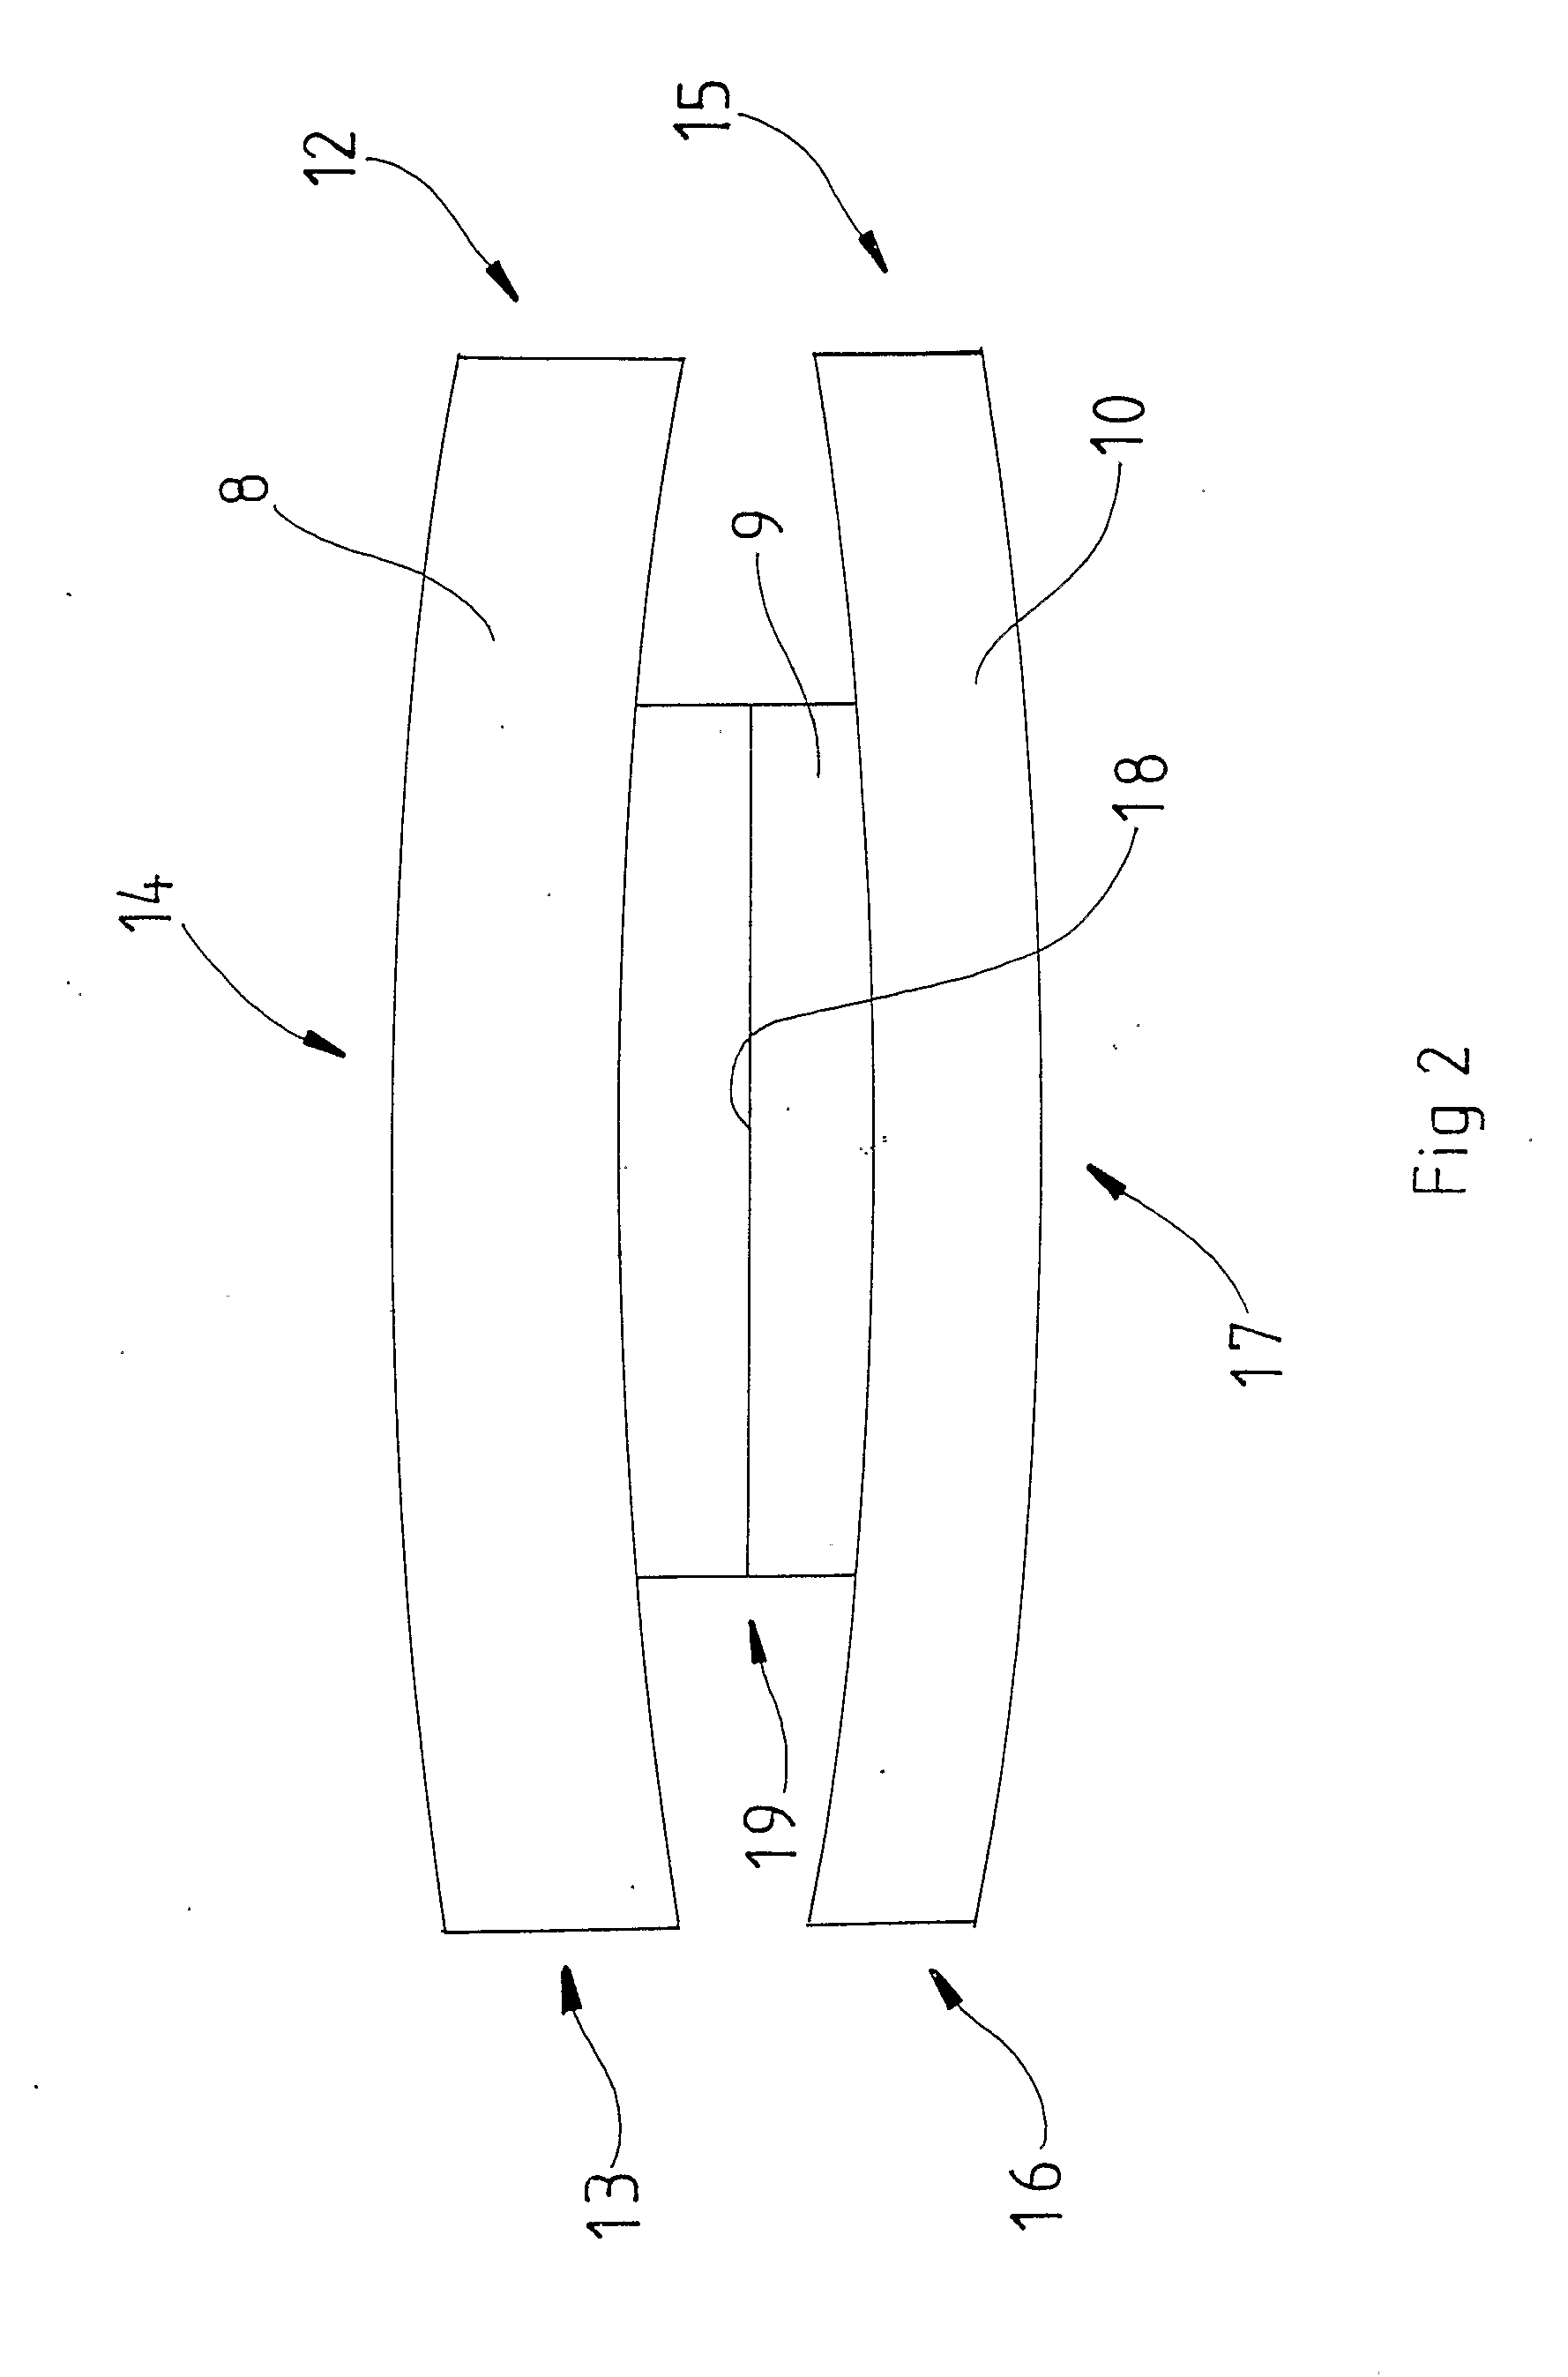 Apparatus and method for compensating for stress deformation in a press